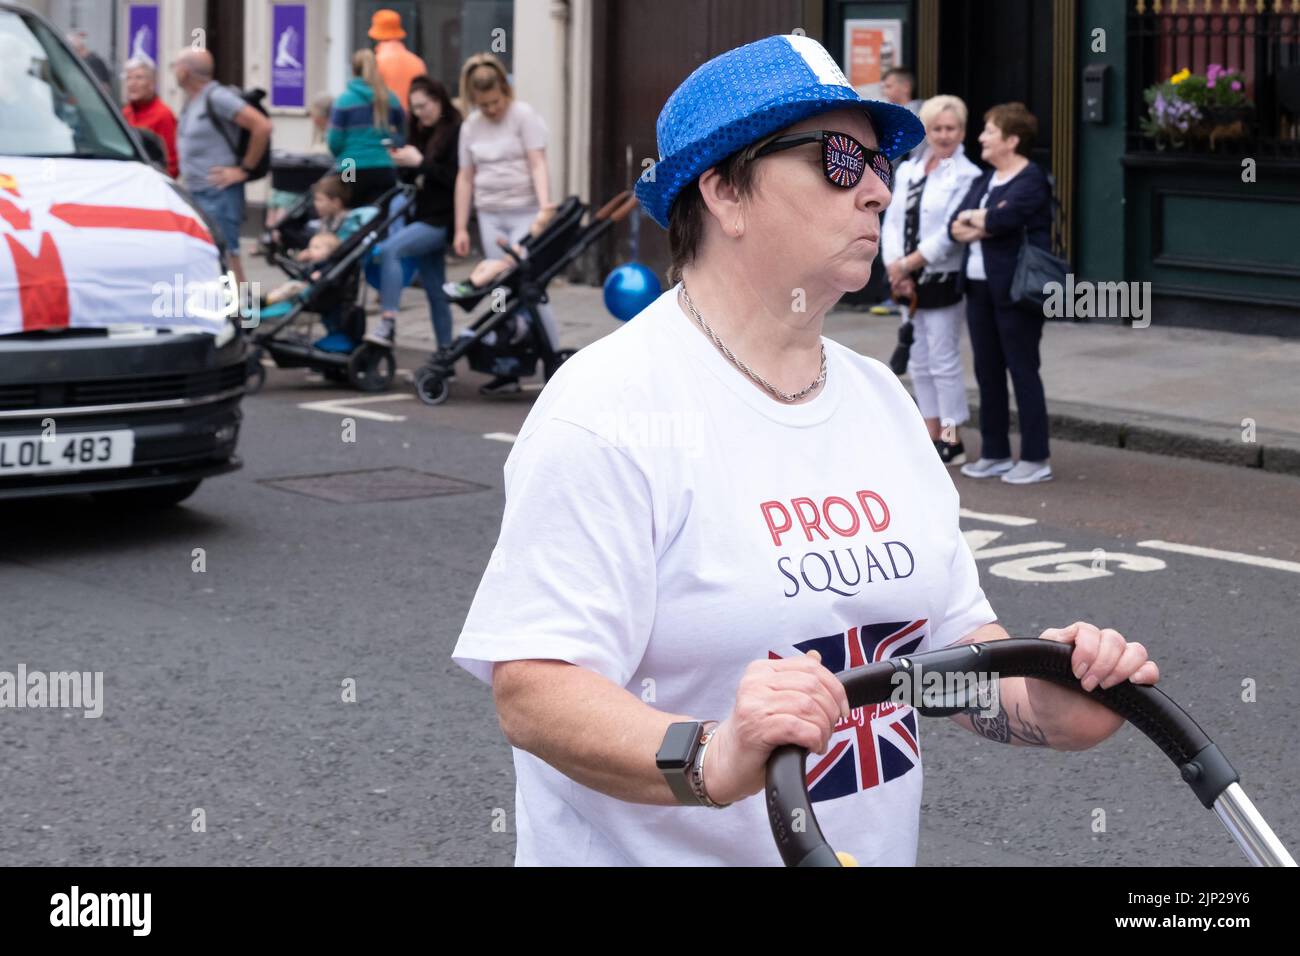 Antrim, 12th July 2022, UK. Woman wearing Ulster sunglasses and Prod Squad t-shirt walking behind one of the bands at annual Twelfth demonstation. Stock Photo